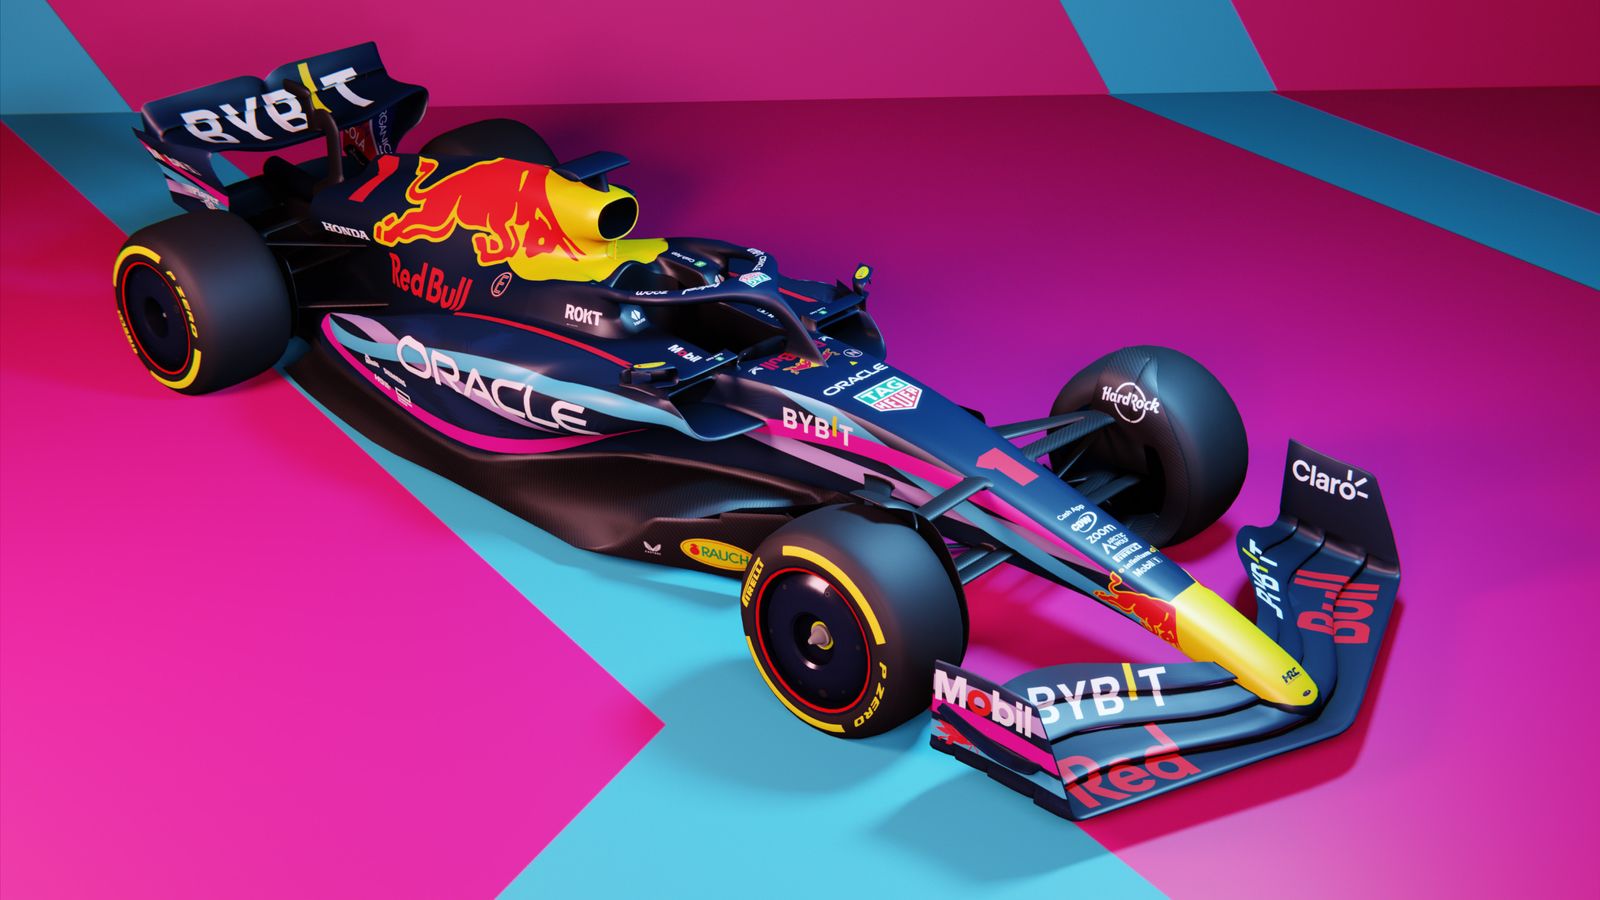 Miami Grand Prix: Crimson Bull unveil particular RB19 livery designed by fan for US race